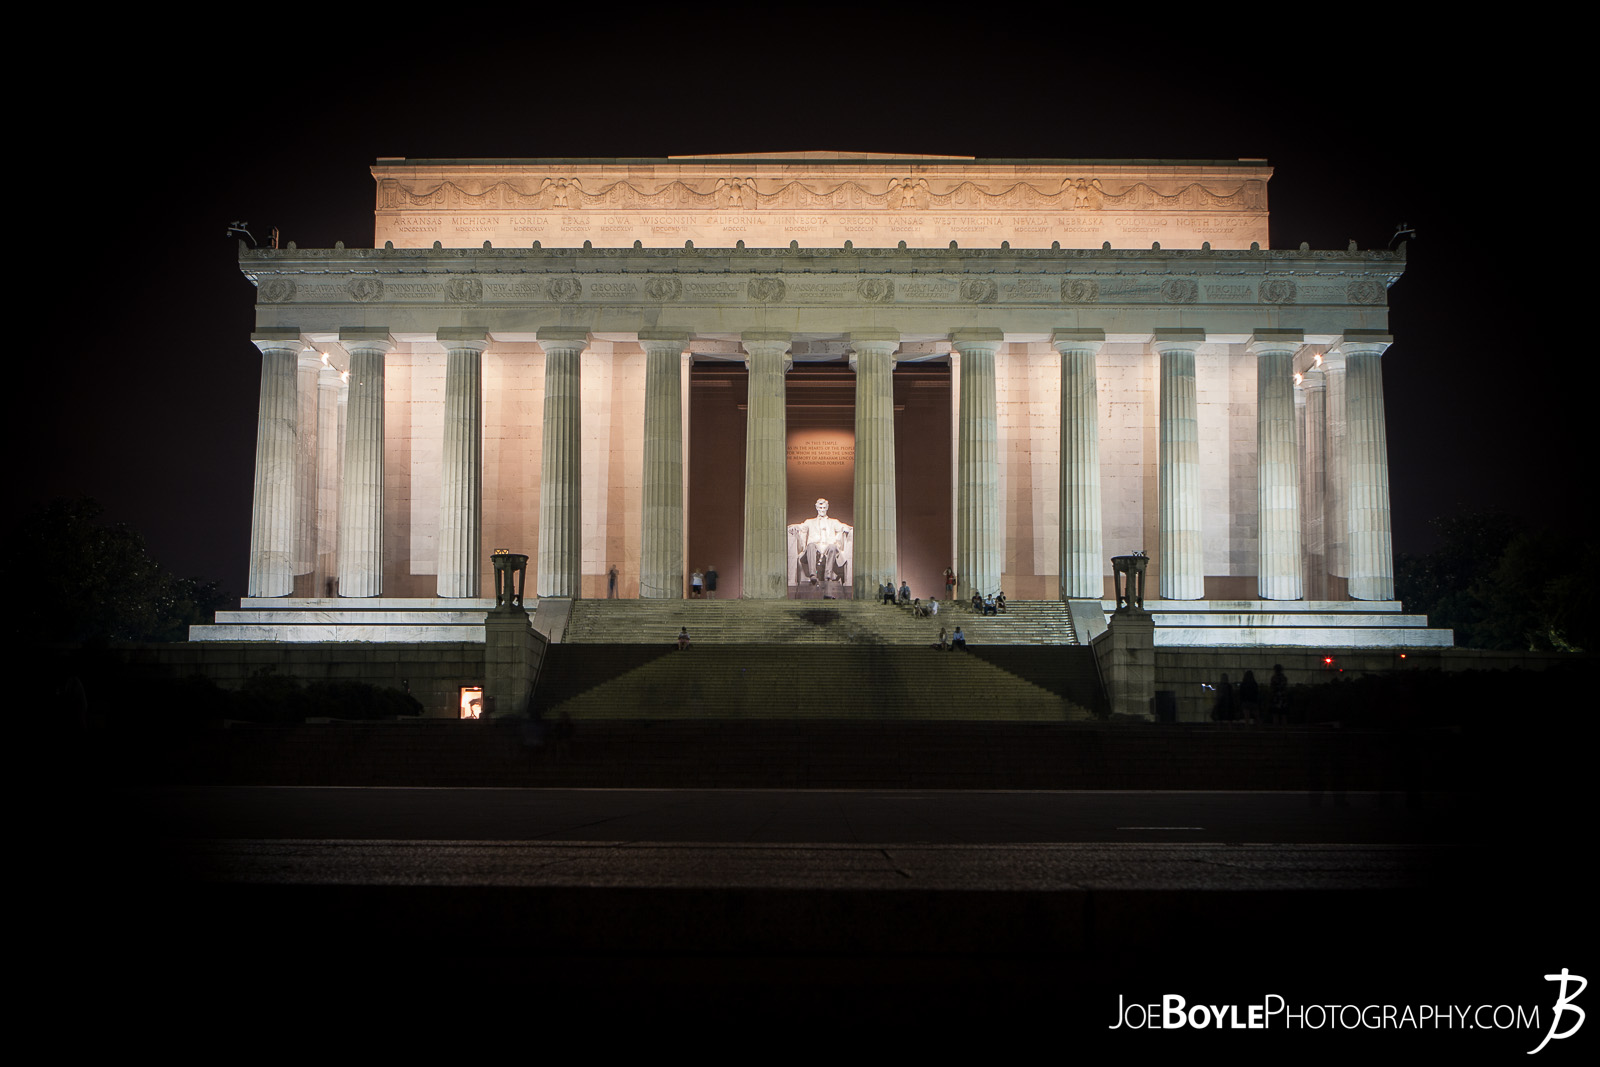  While I was in Washington, DC I was able to take some great night images of a few of the iconic landmarks that make up this city! Here is an image of the Lincoln Memorial! 